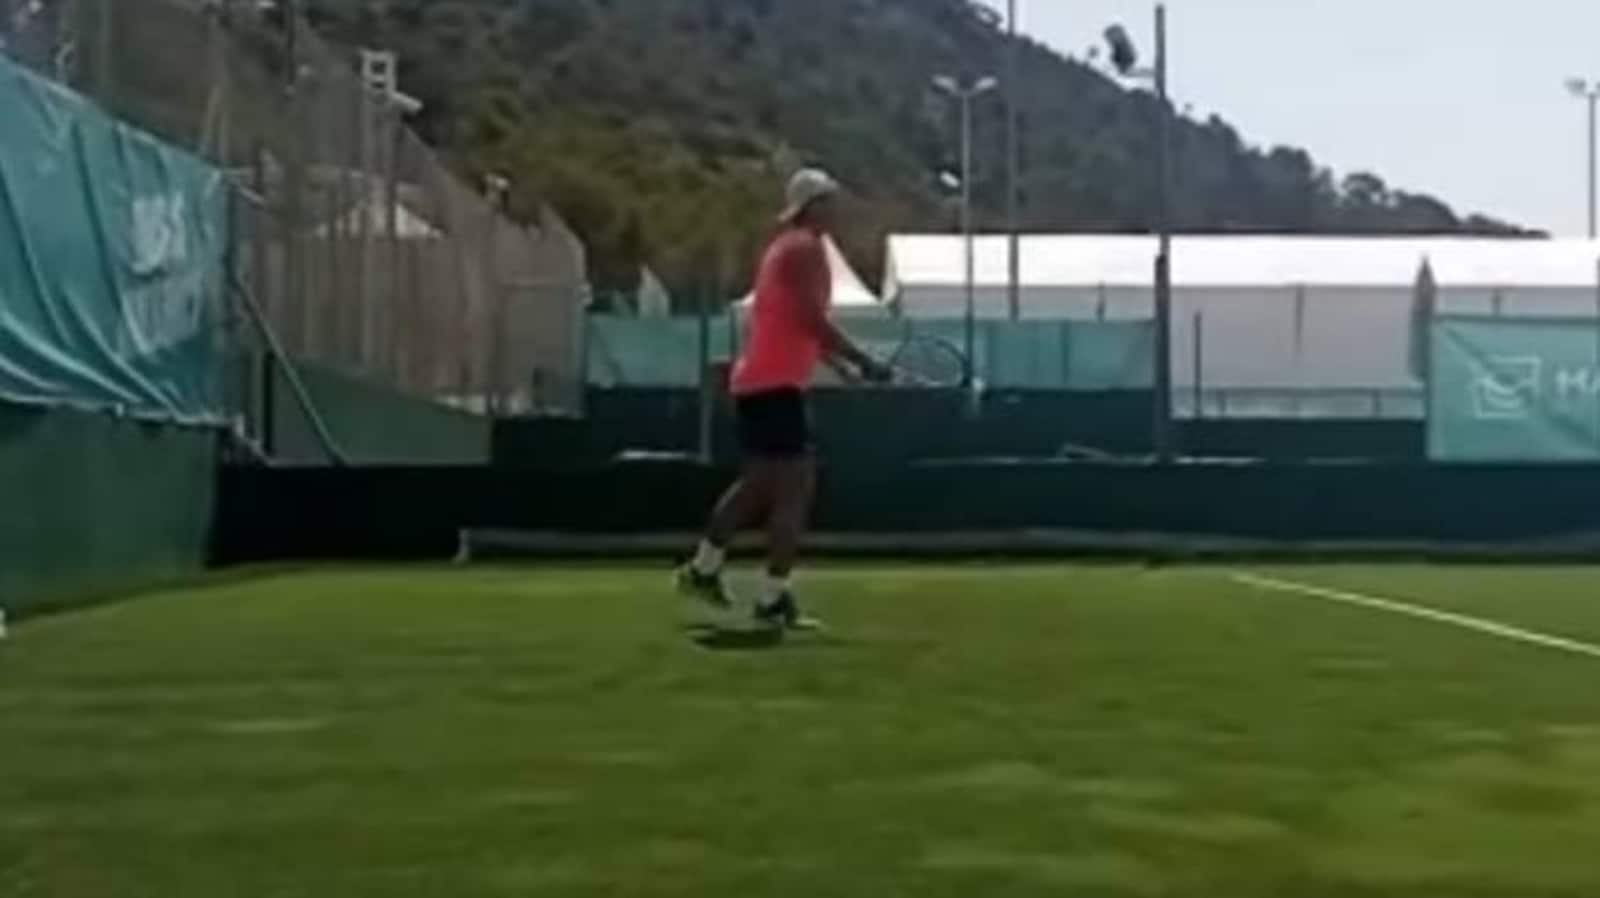 Watch: Rafael Nadal's practice session on grass ahead of big Wimbledon announcement breaks the internet